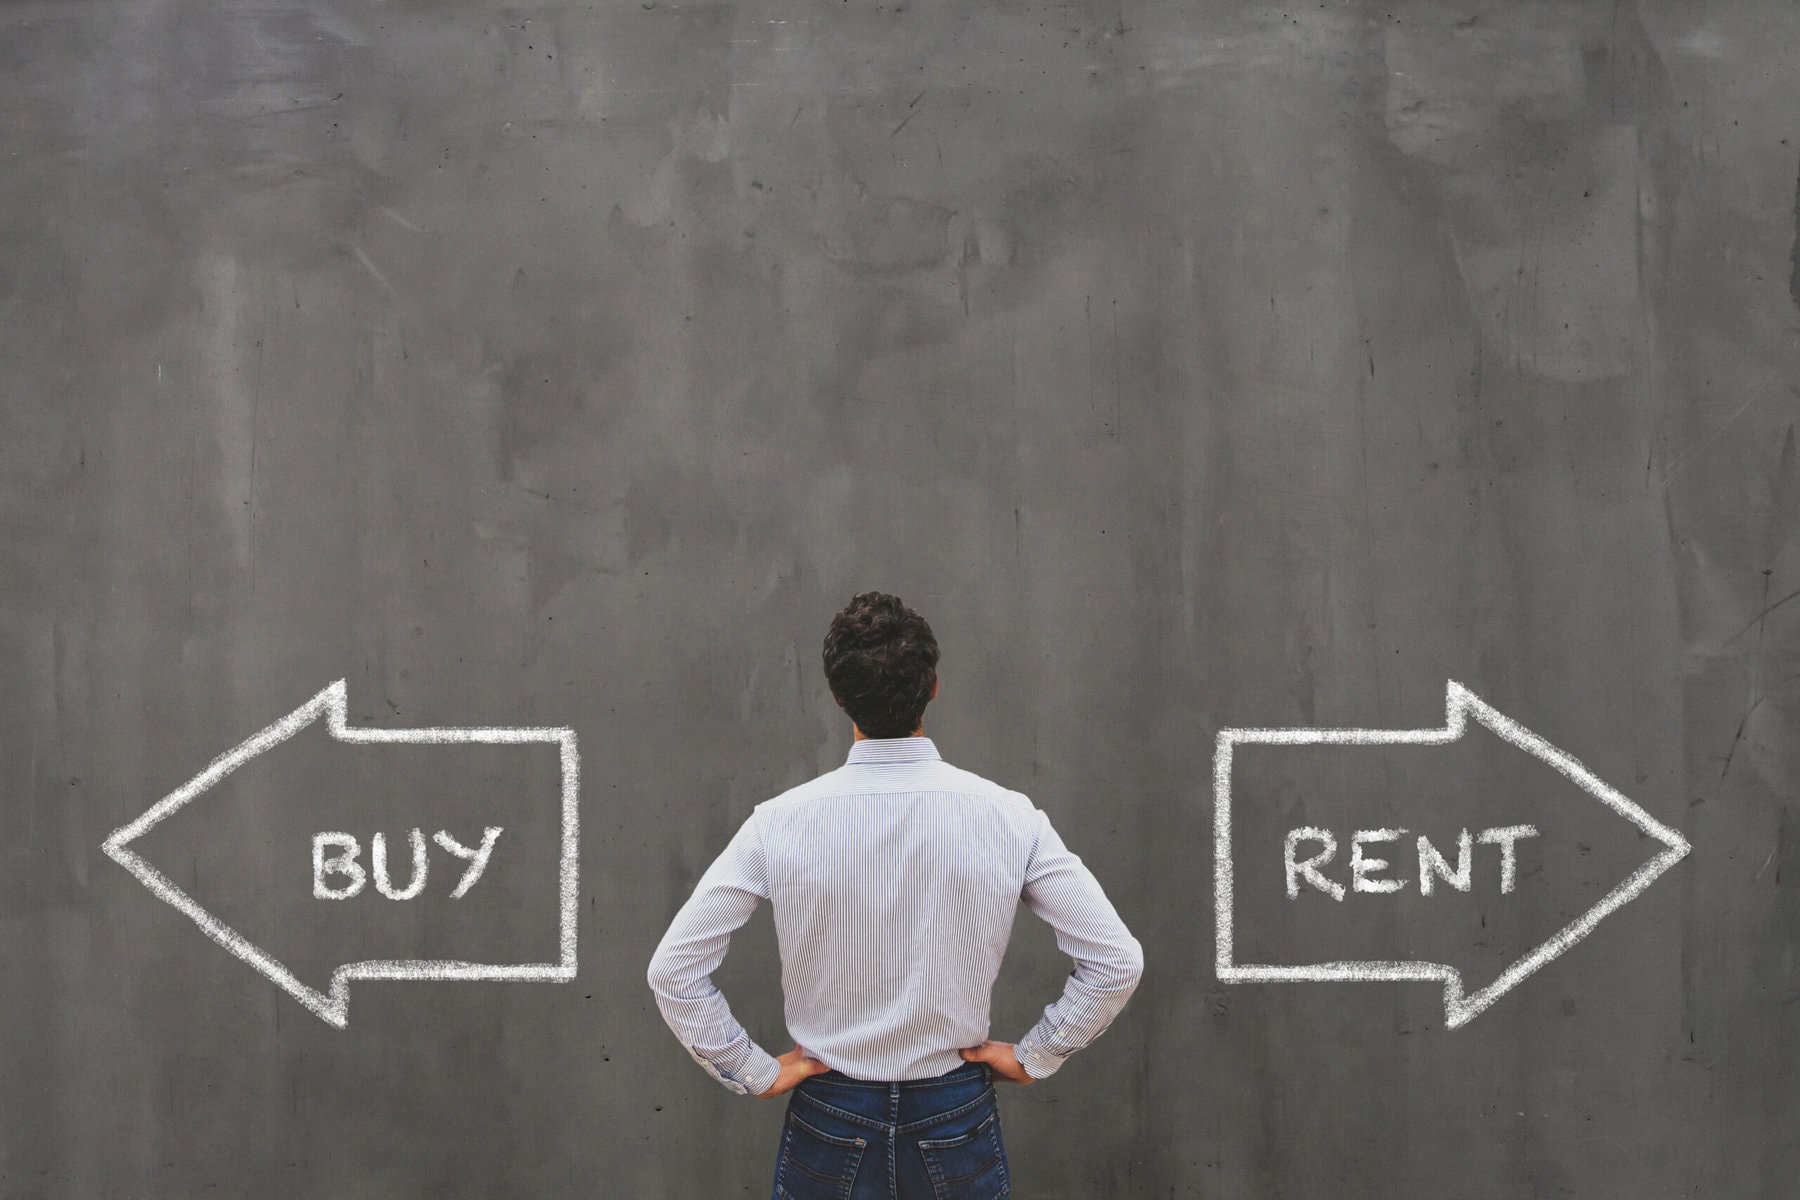 national-study-confirms-renting-still-cheaper-than-buying-home-bay